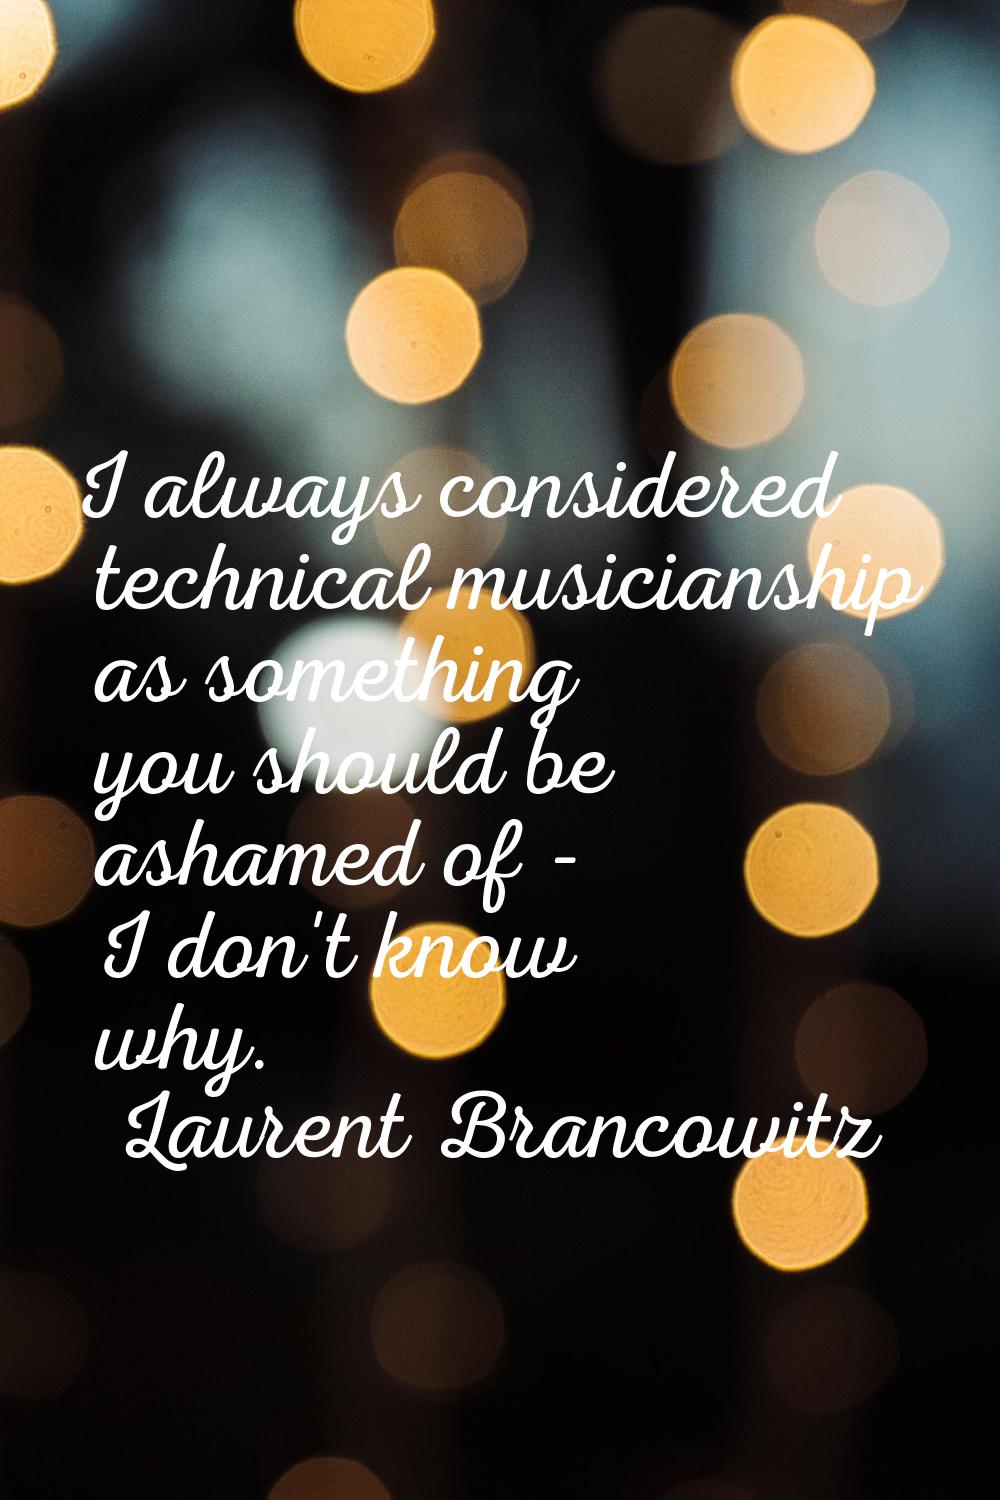 I always considered technical musicianship as something you should be ashamed of - I don't know why